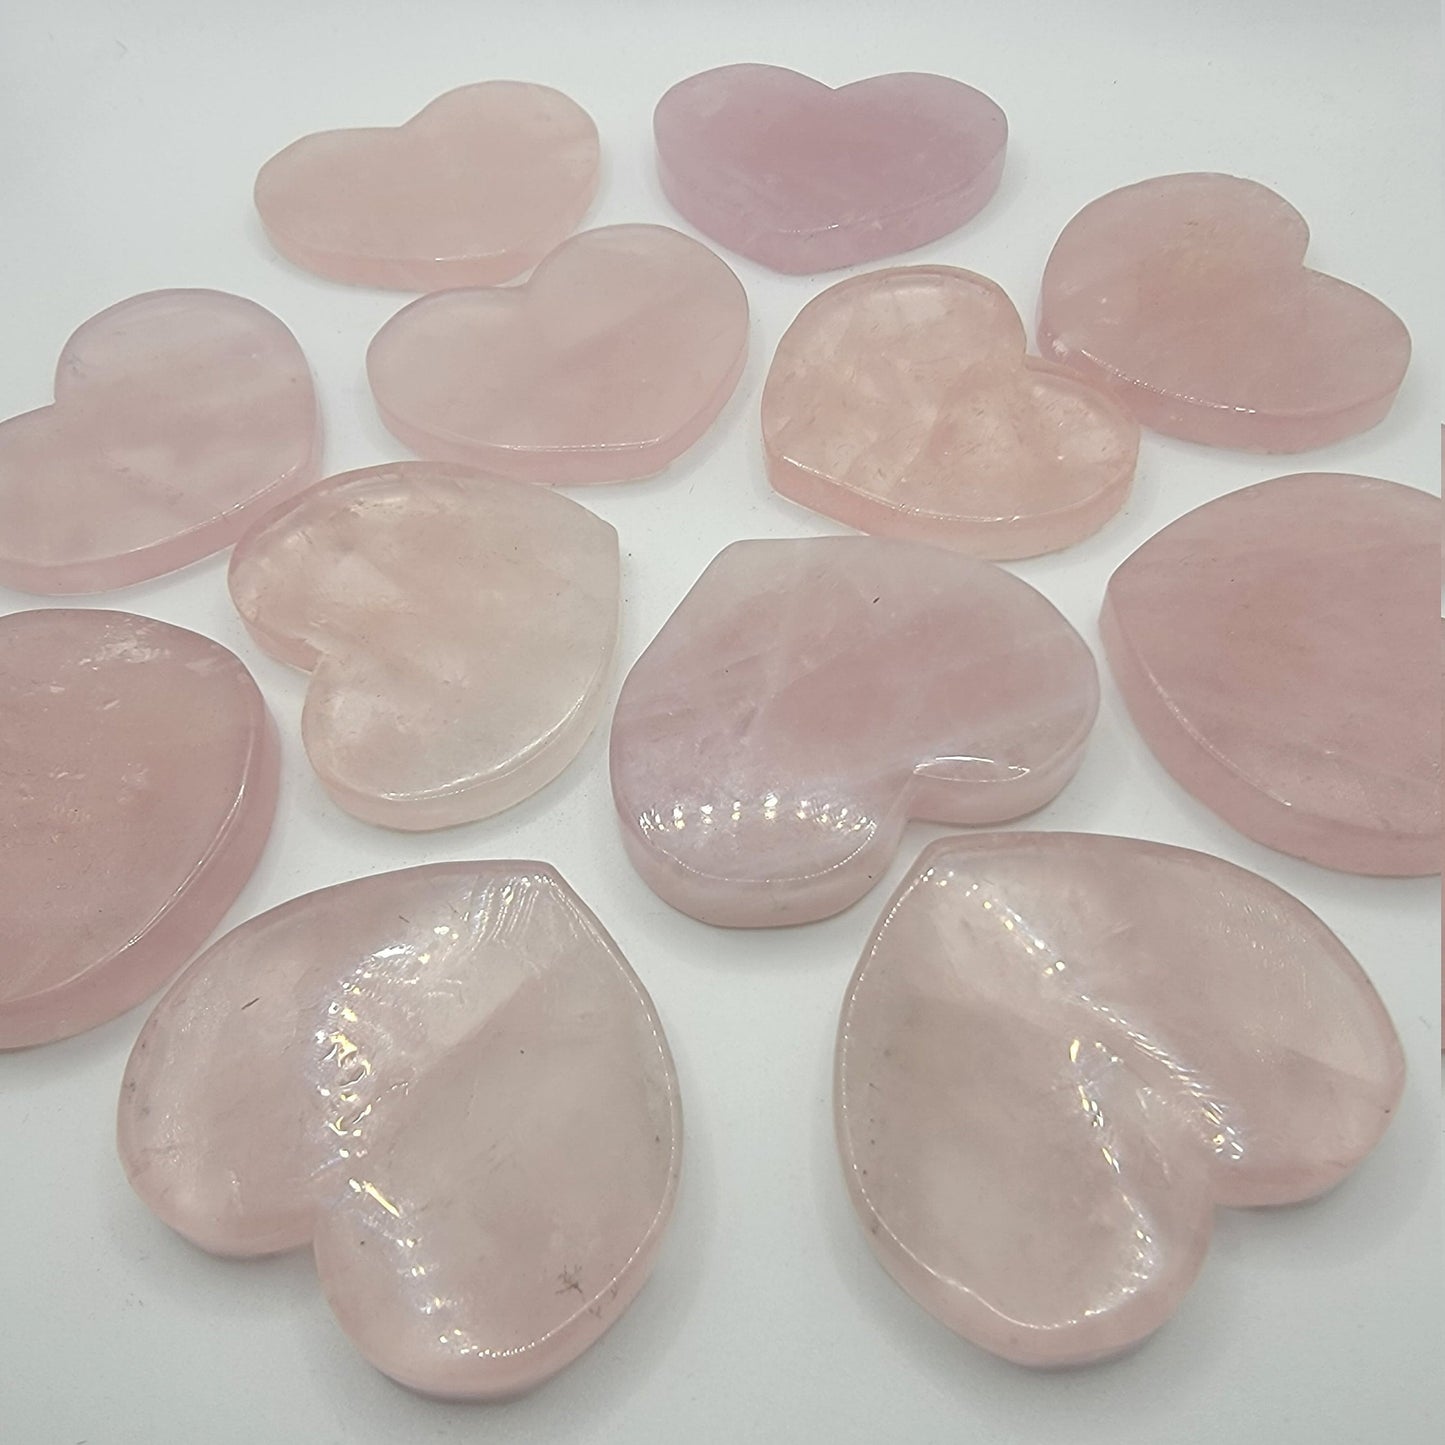 Rose Quartz Heart (Approx. 2" - 2 1/2") Heart Healing Flat Pink Stone Heart for Crafts or Crystal Grid 1435